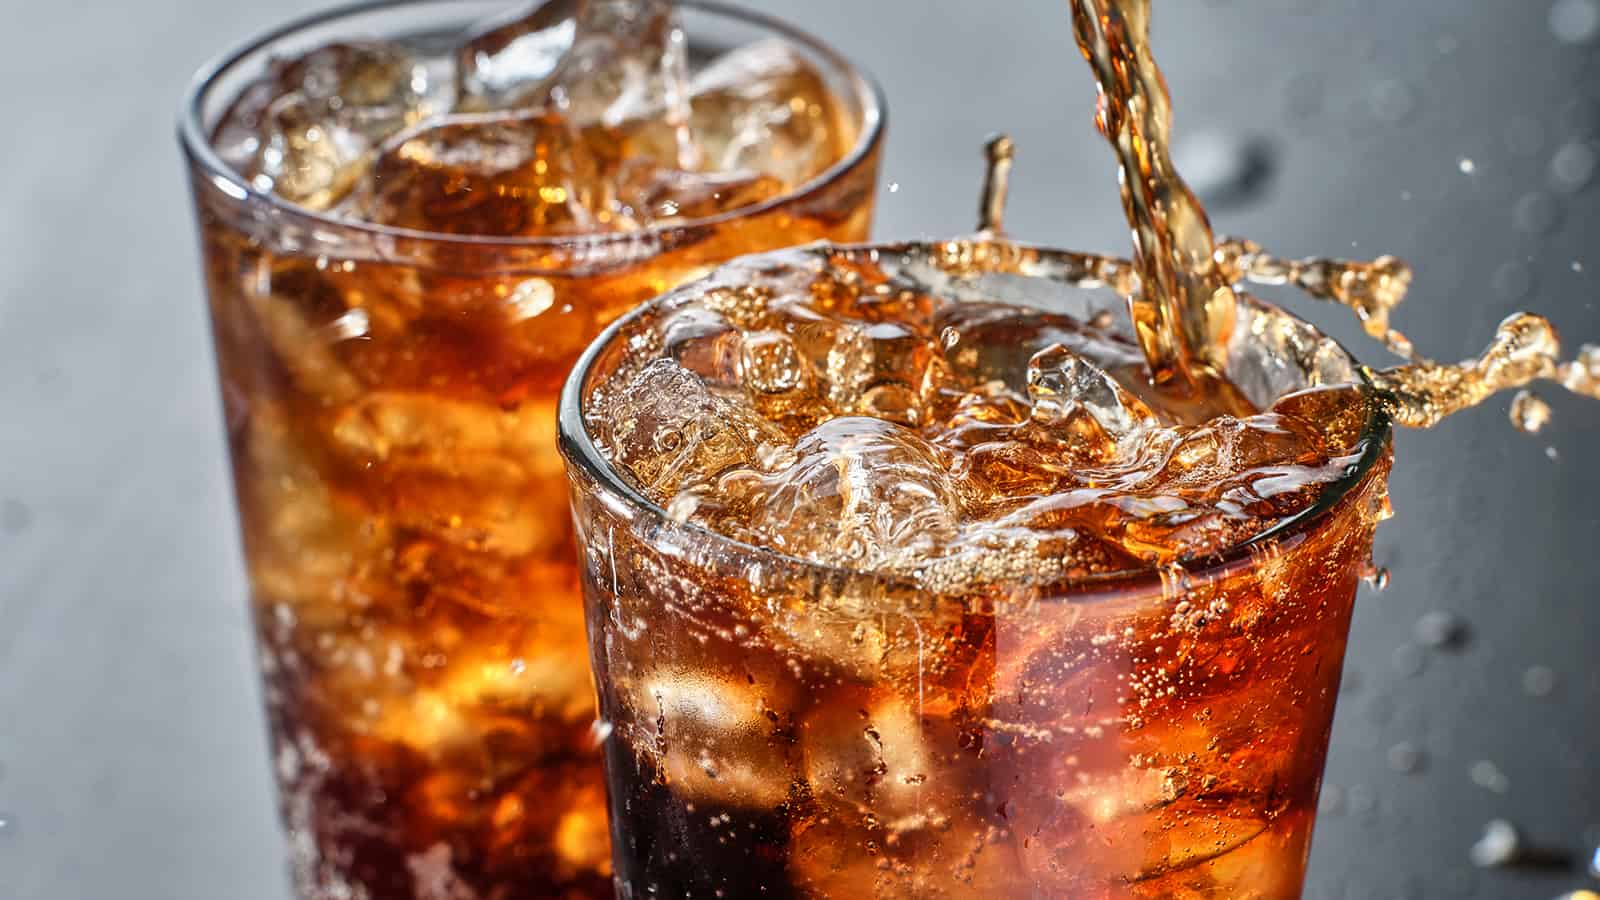 14 Day Soda Detox to Reset Your Body and Brain